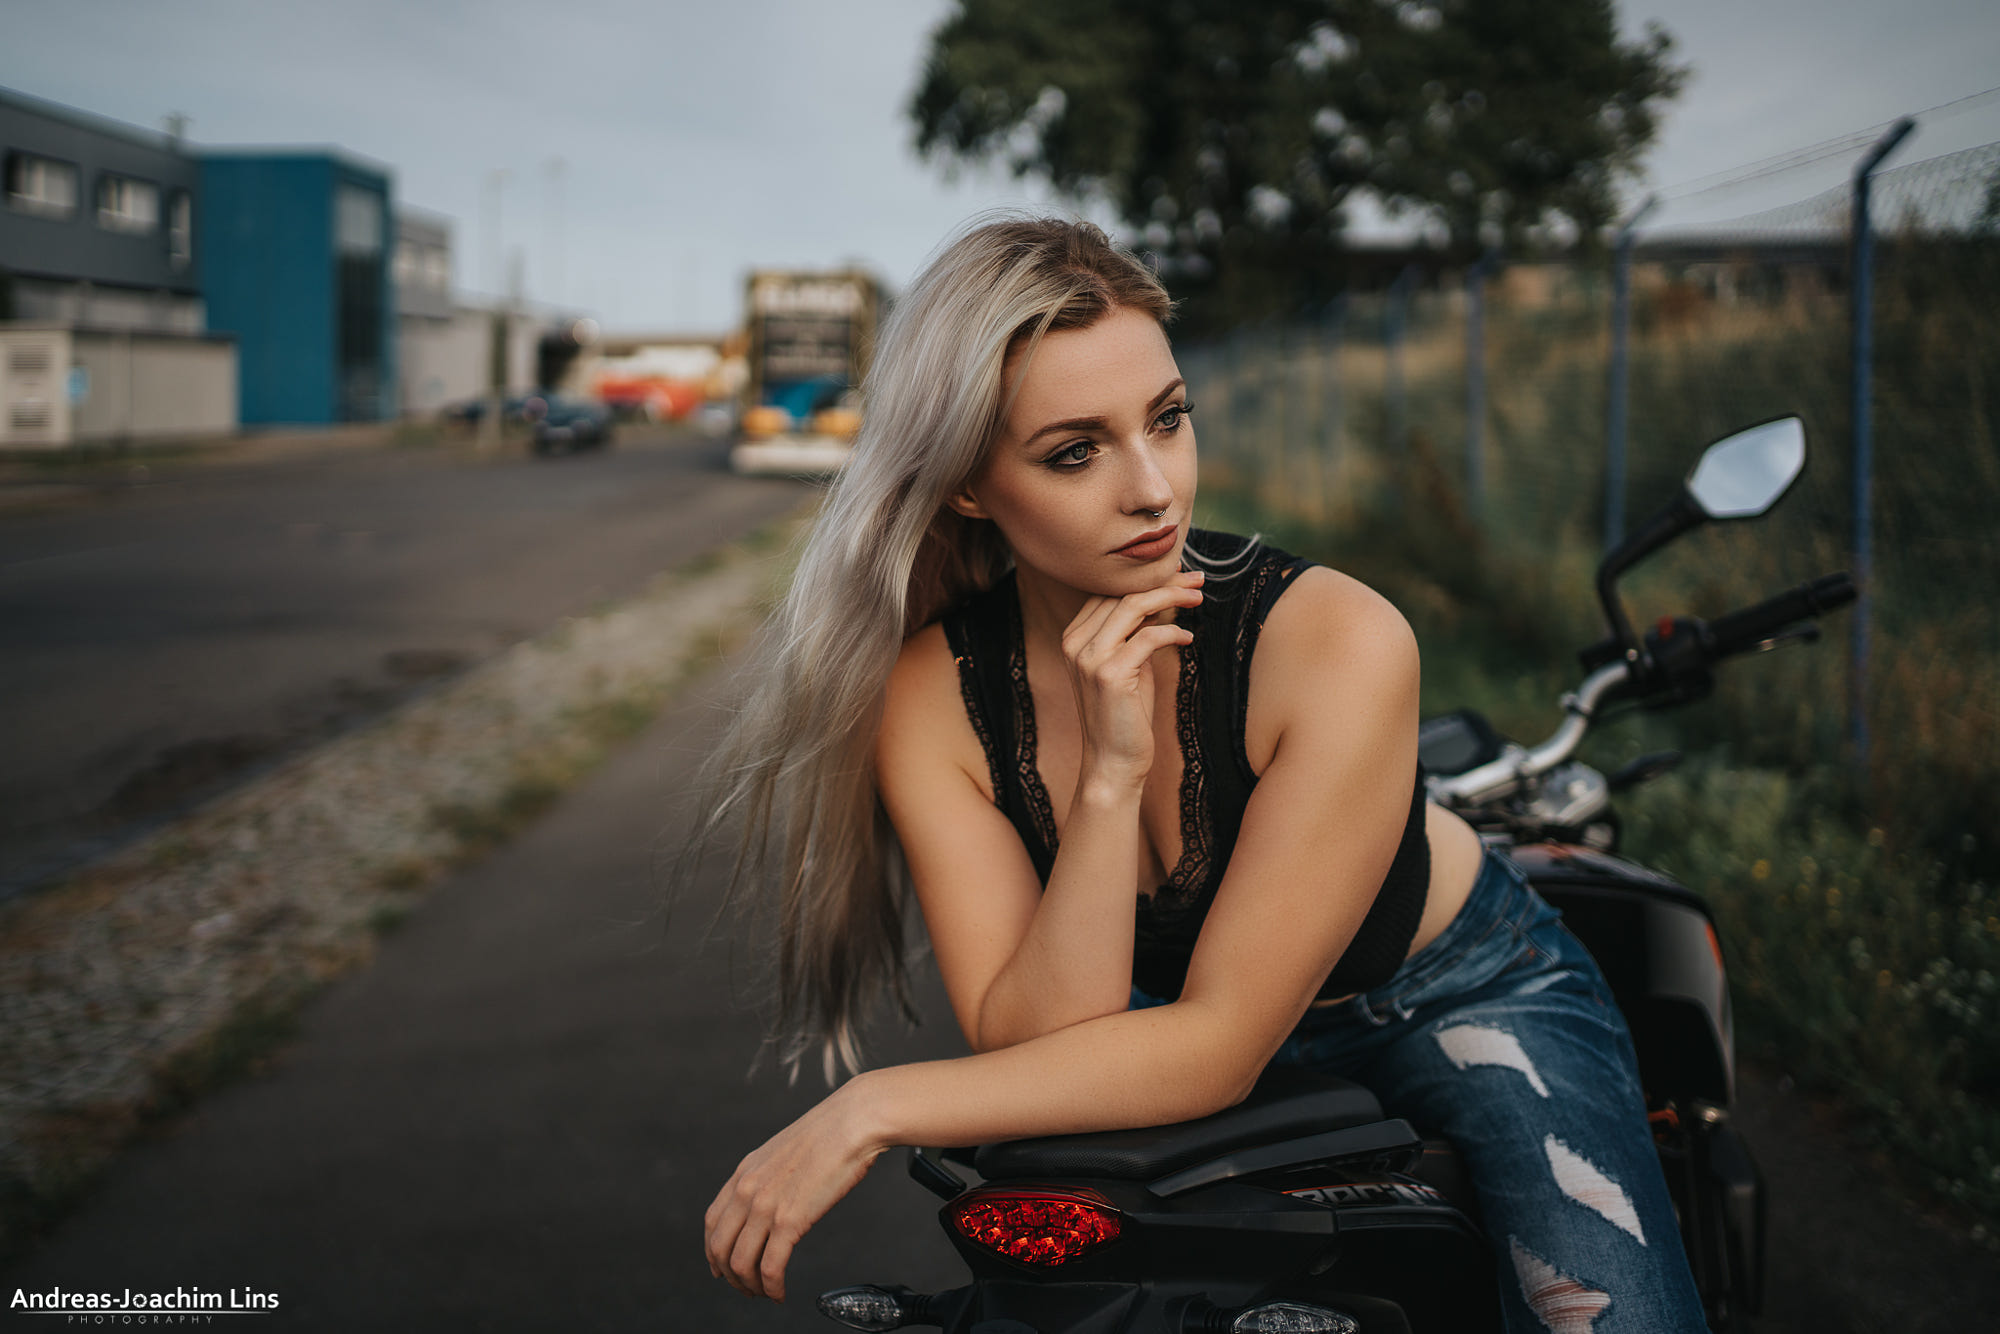 People 2000x1334 women long hair torn jeans women with motorcycles nose ring brunette Andreas-Joachim Lins women outdoors looking away blonde dyed hair Maike Shepherd